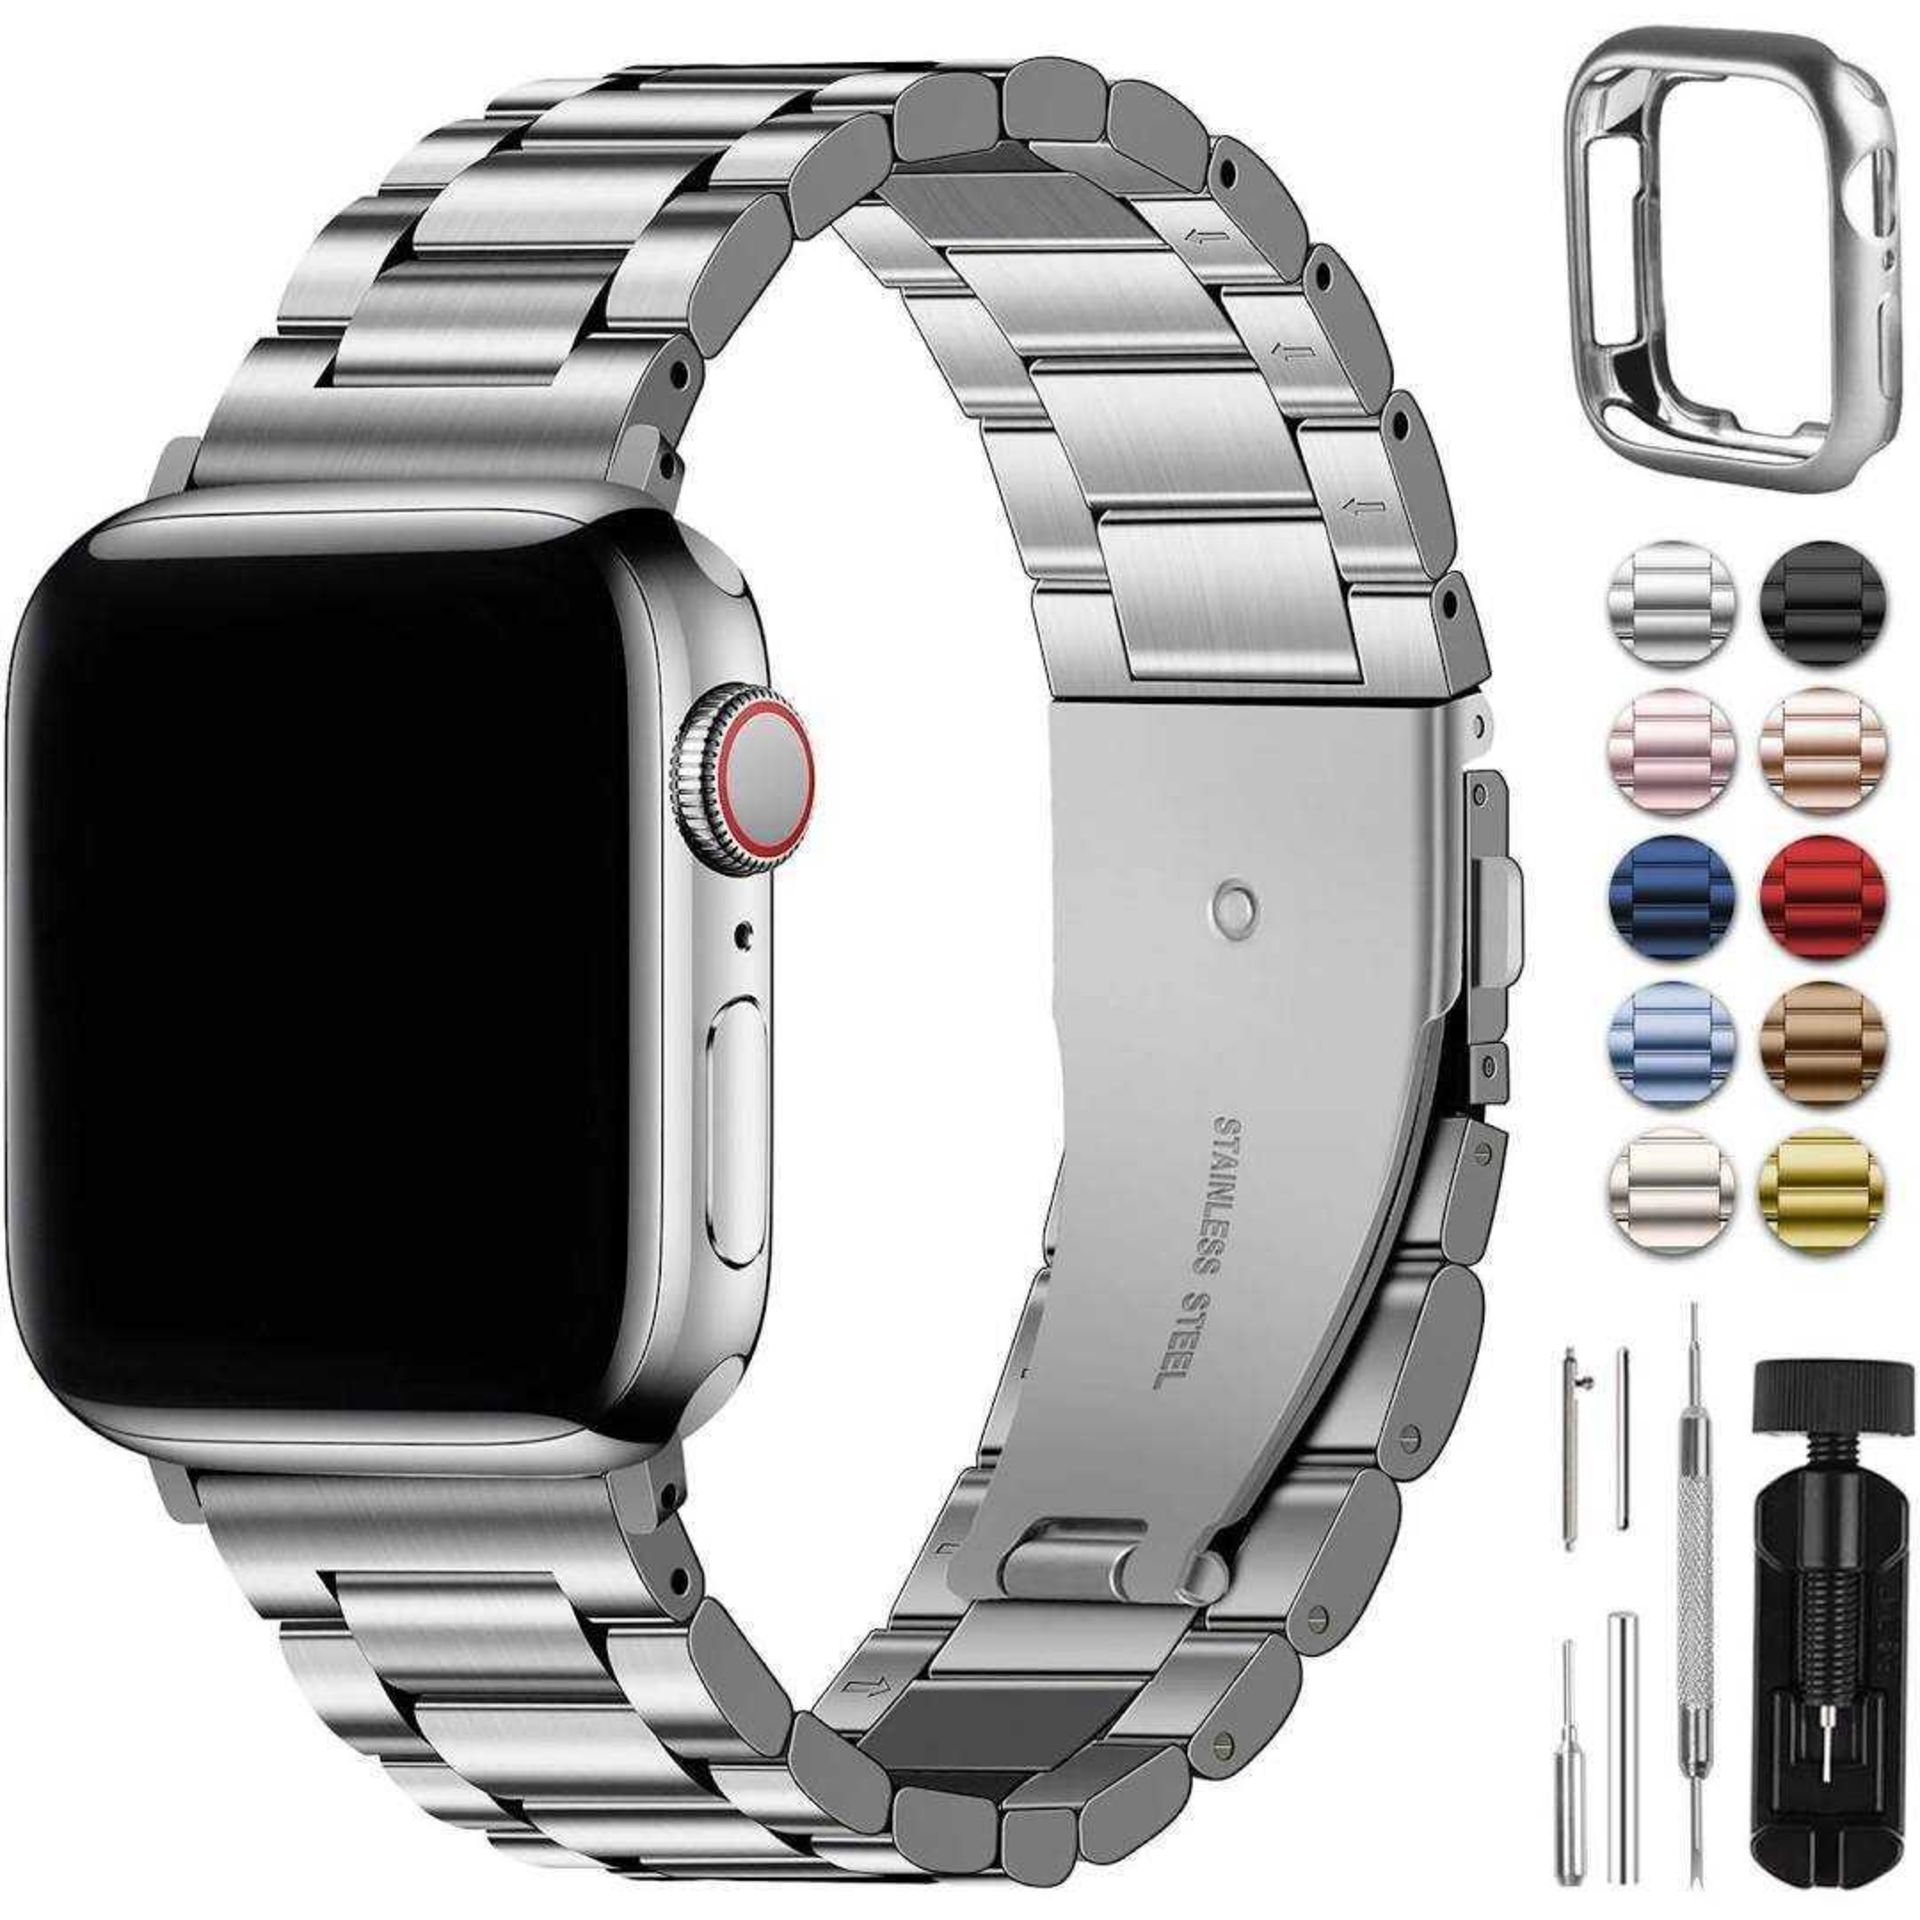 RRP £110 X6 Like New Assorted Items Including Art Che Stainless Steel Band For Apple Watch